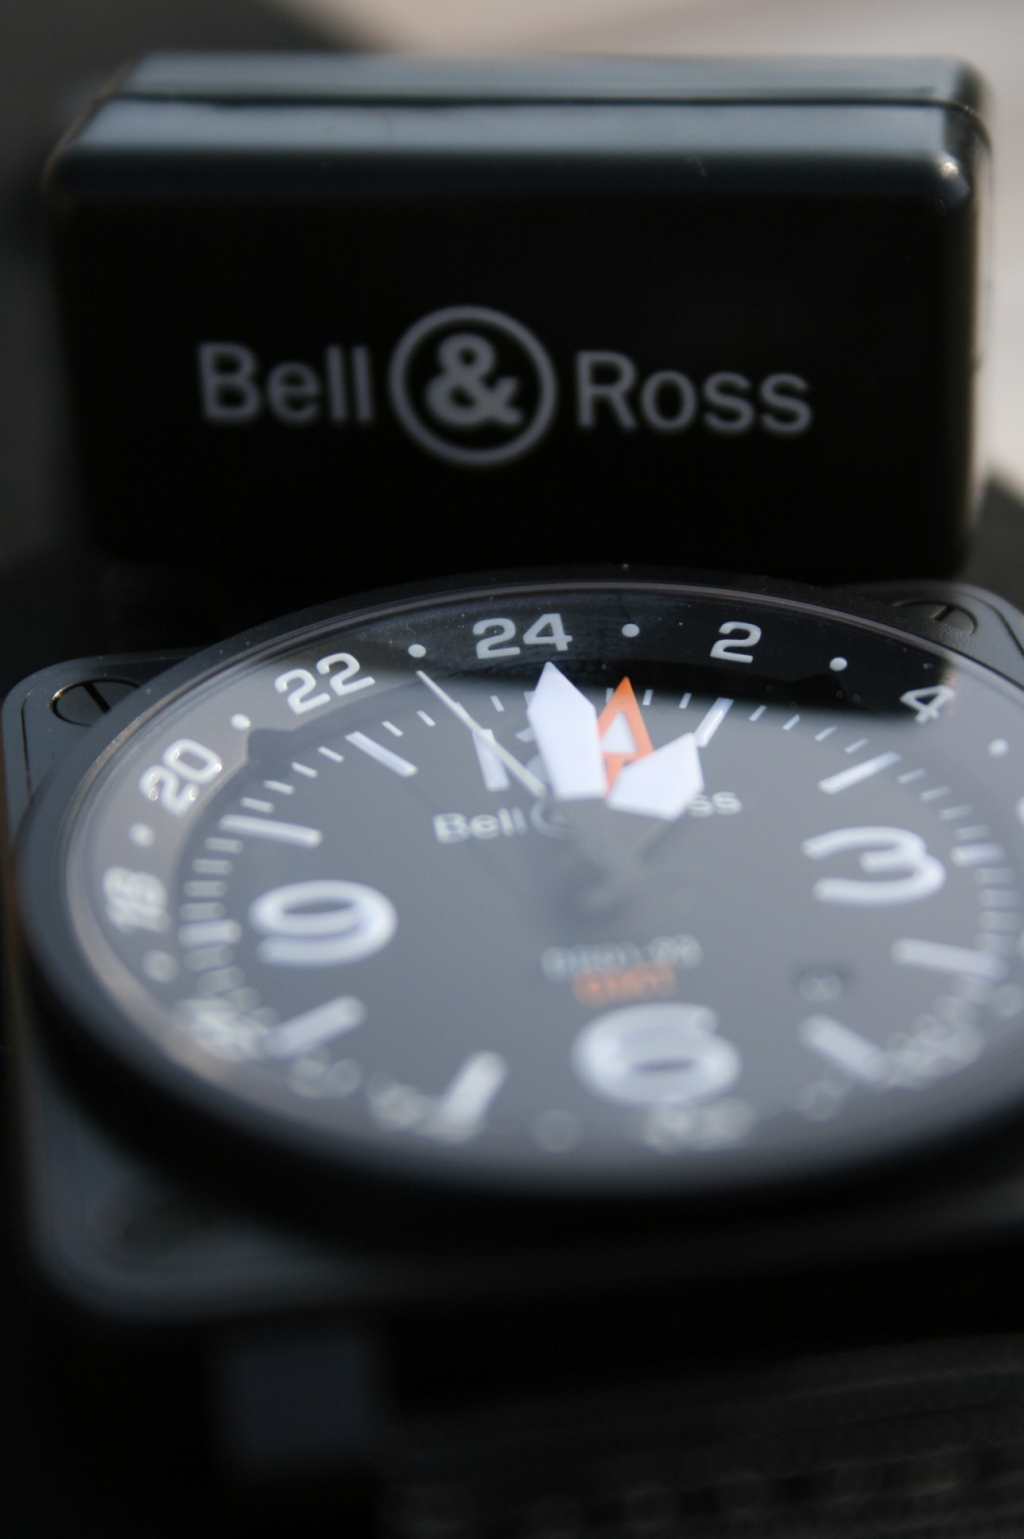 Le club des heureux propriétaires Bell and Ross - Tome II - Page 40 1010090204201149036893011